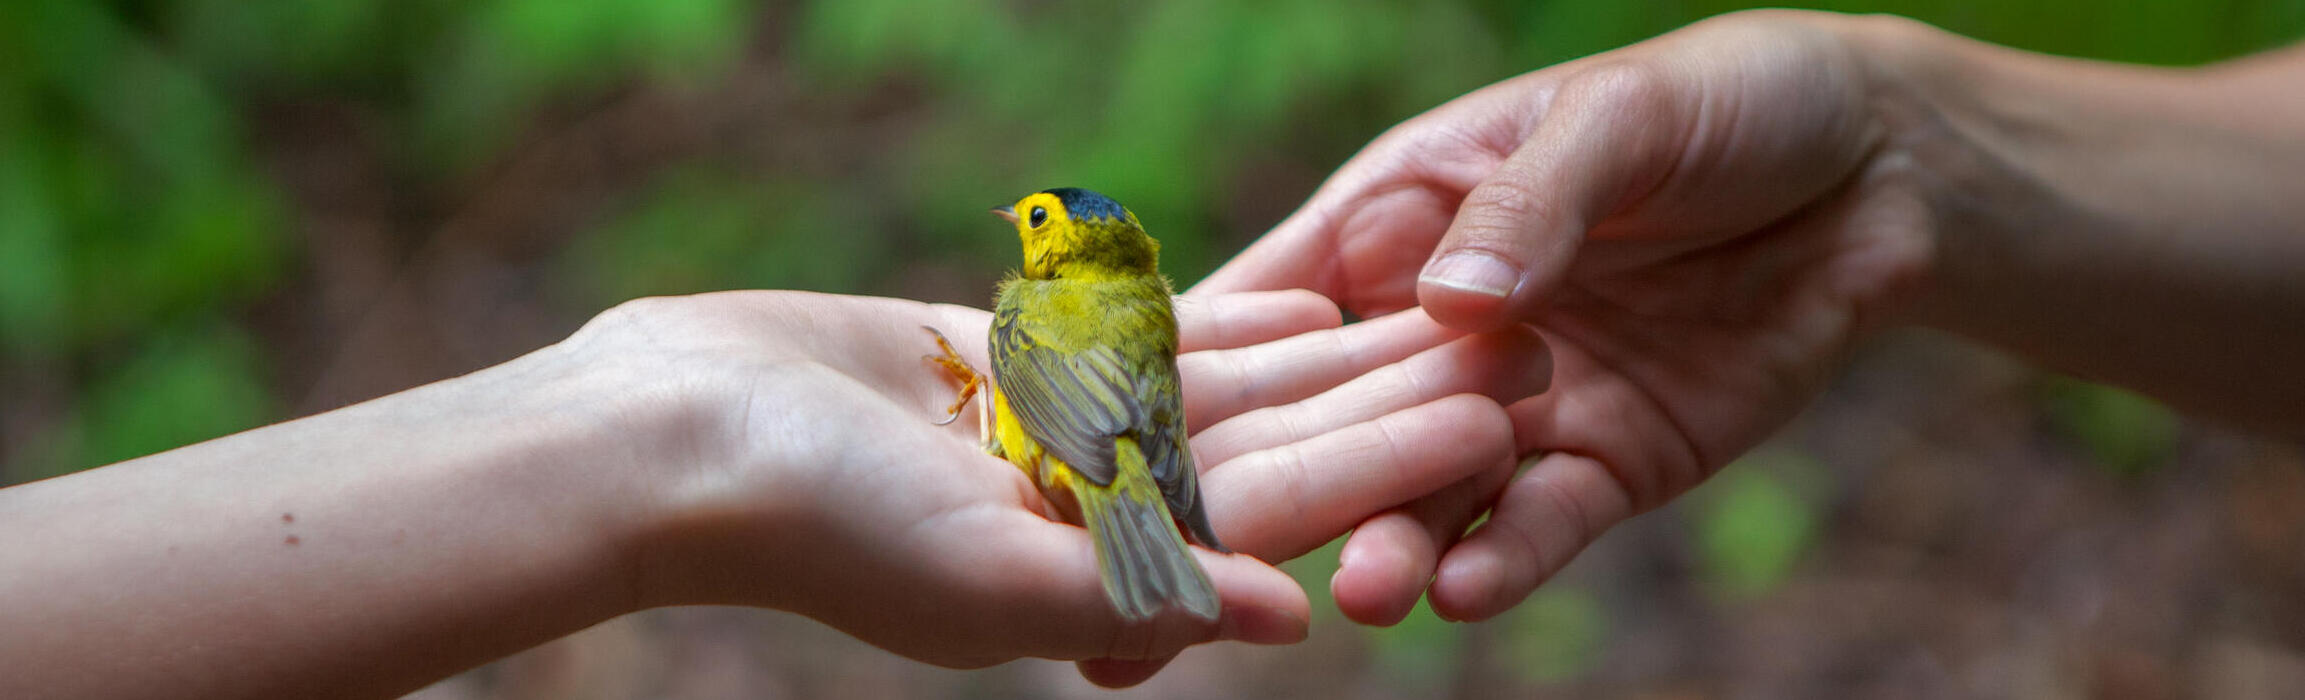 A hand passes a juvenile Hooded Warbler to someone else's hand. Likely this bird was just banded and is being released.